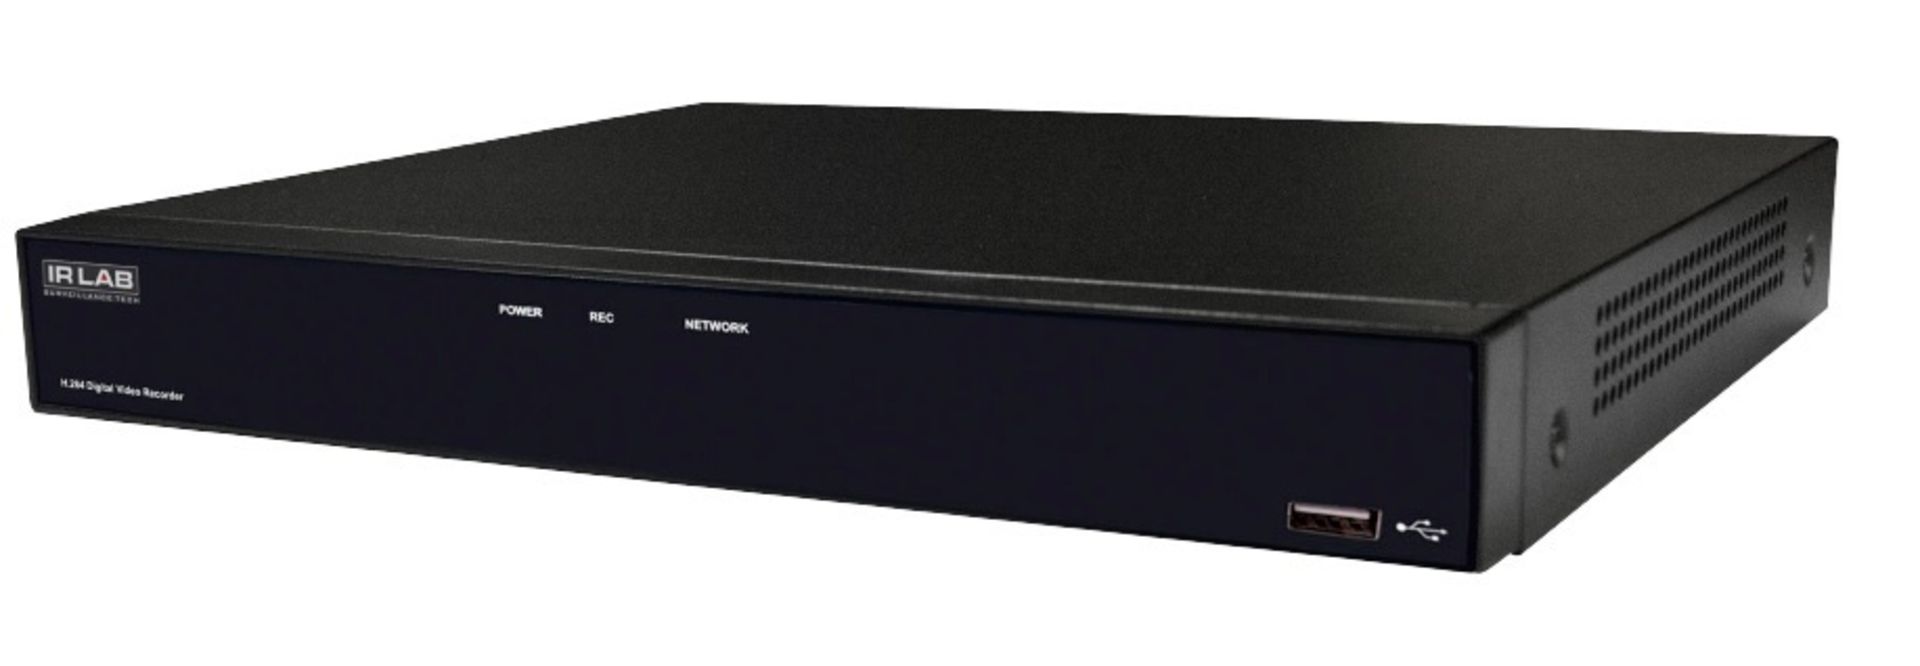 IRLAB HDCVI 5 IN 1 16 Channel DVR Supports HDCVI, TVI, AHD, Analogue & IP Cameras. RRP £359.99.